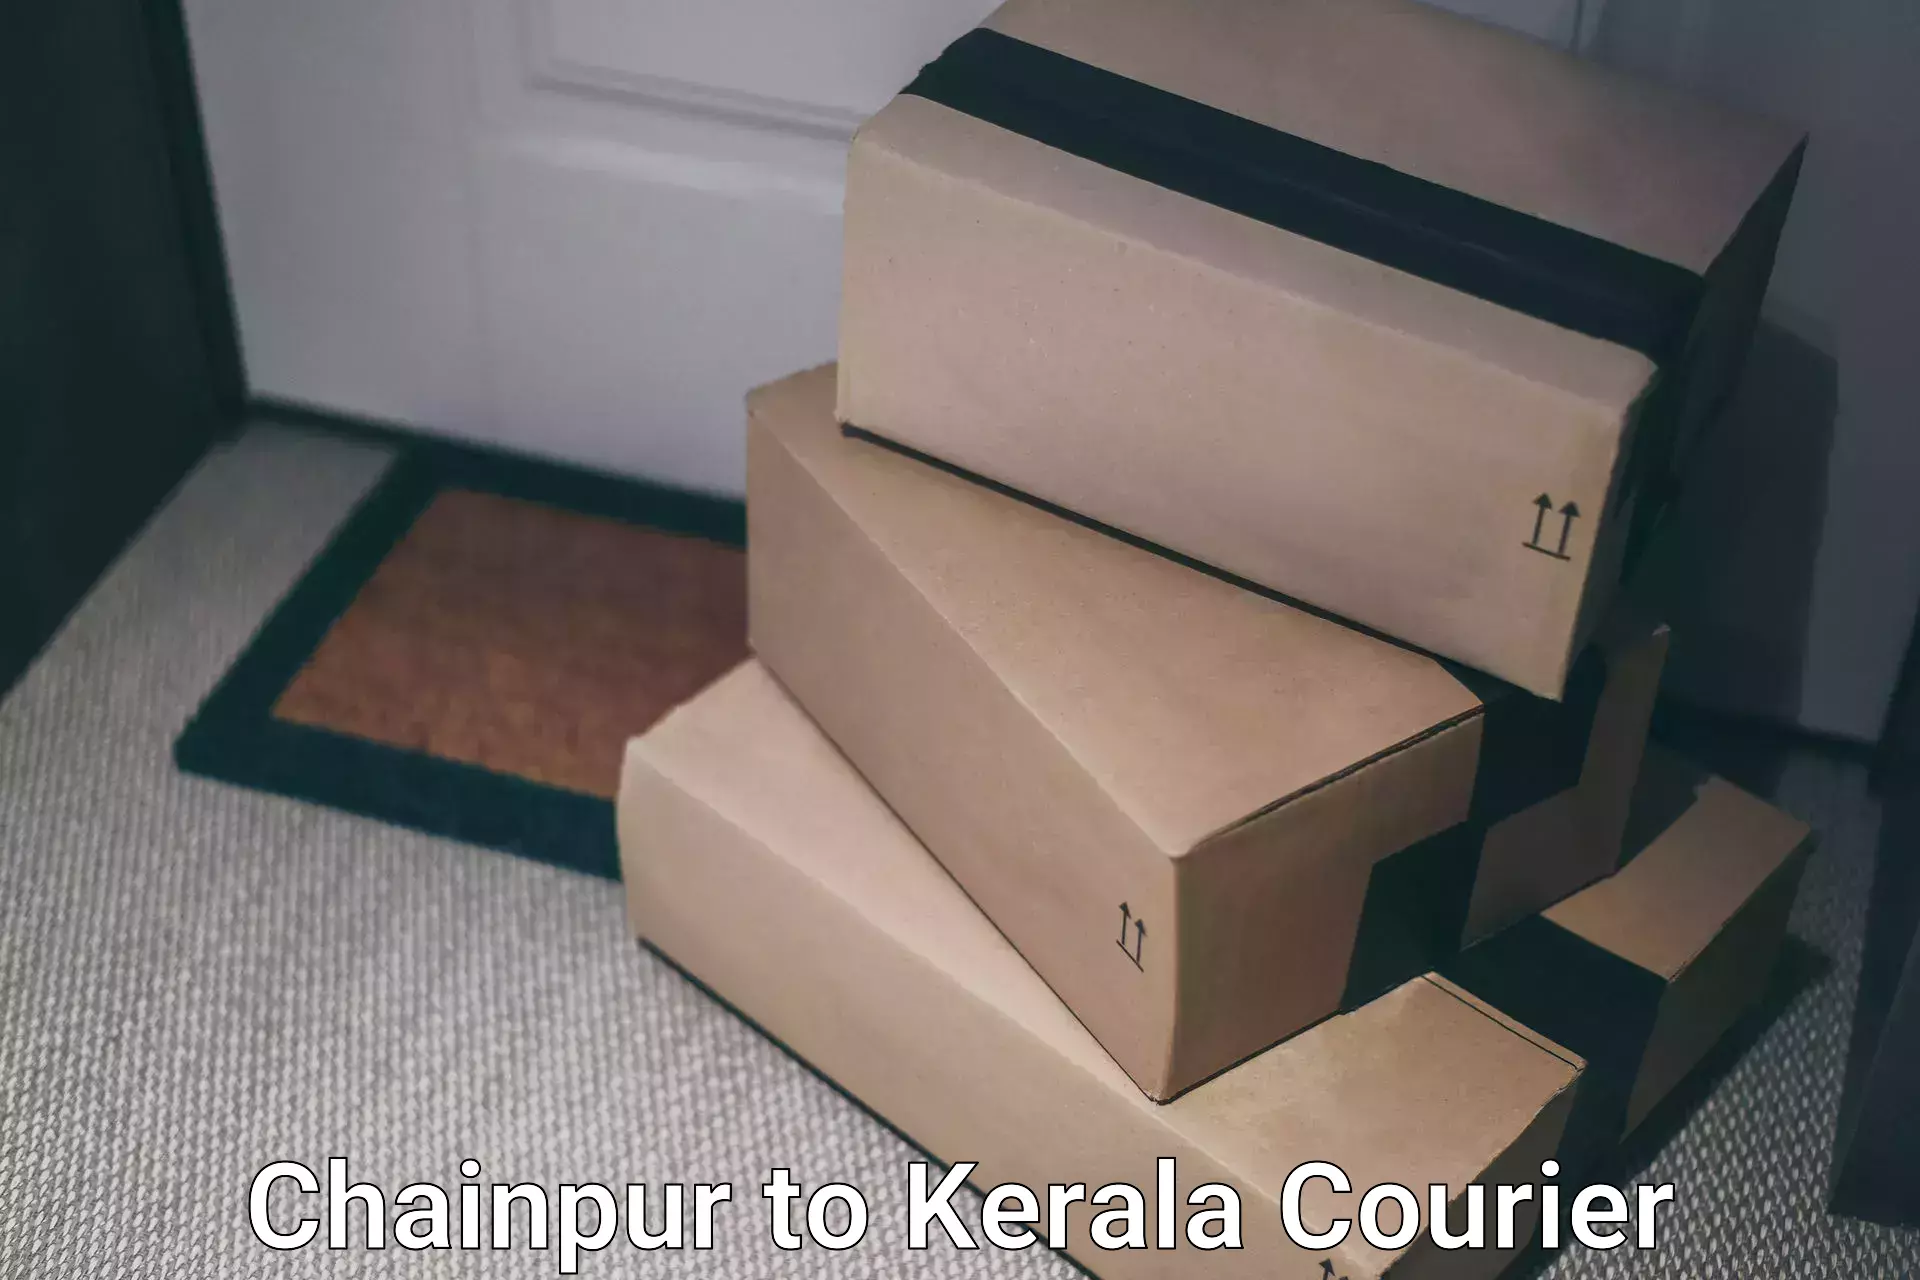 Quality courier partnerships Chainpur to Cochin Port Kochi